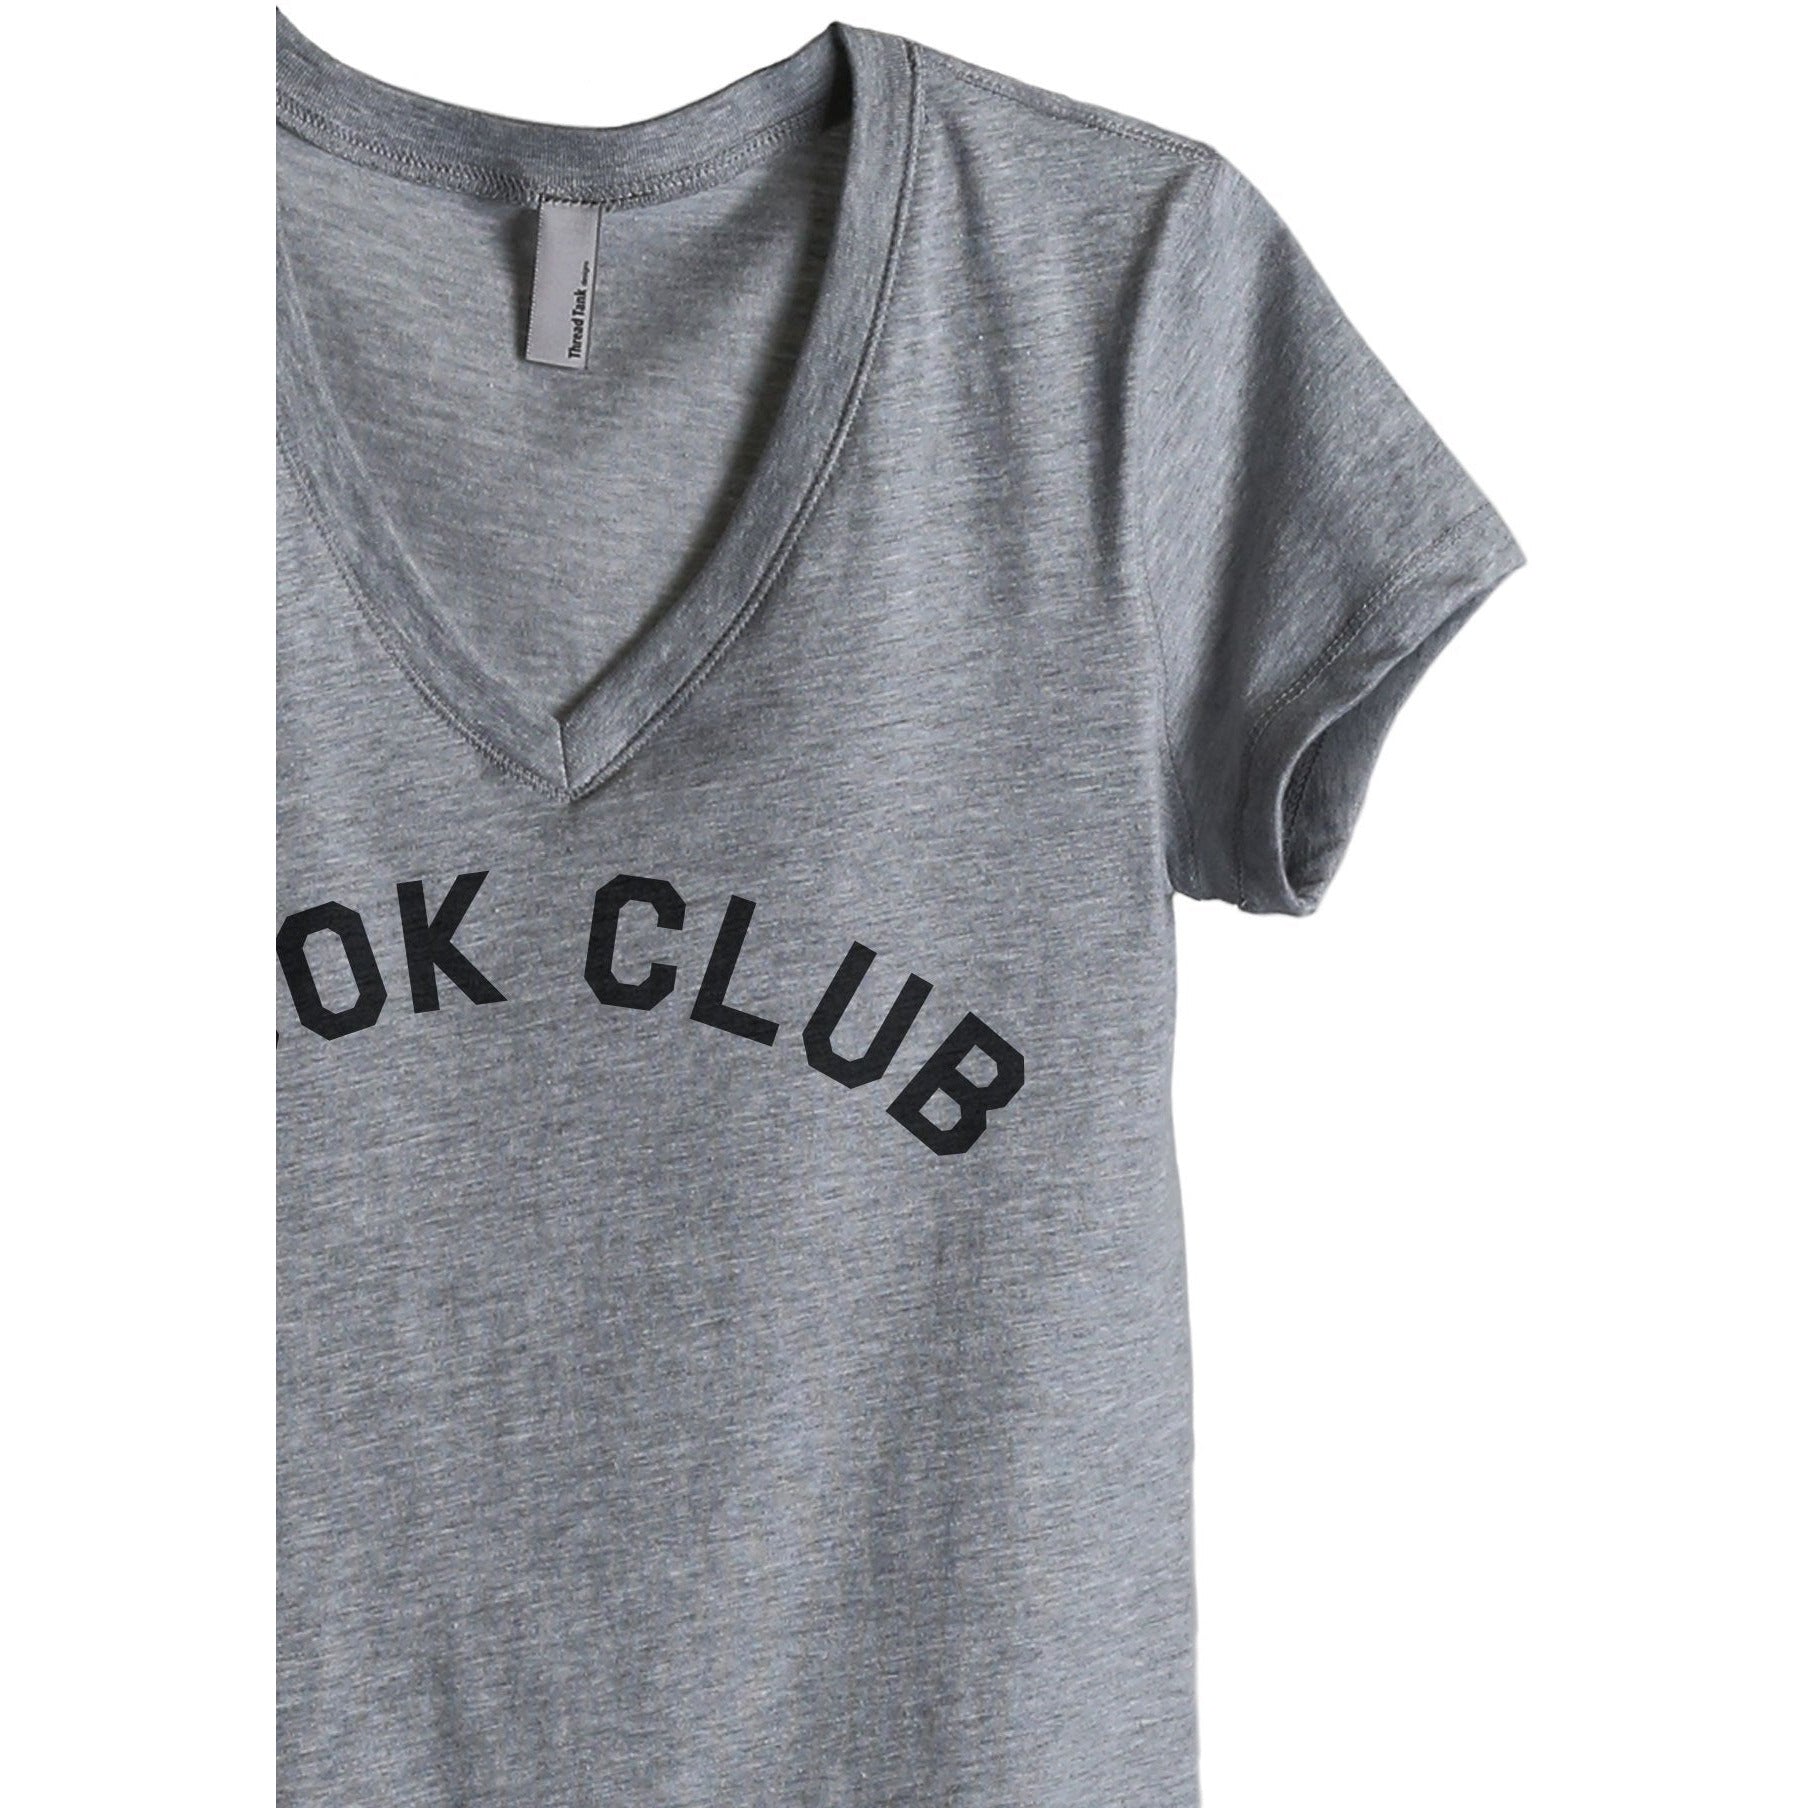 Book Club Women's Relaxed Crewneck T-Shirt Top Tee Heather Grey Zoom Details
